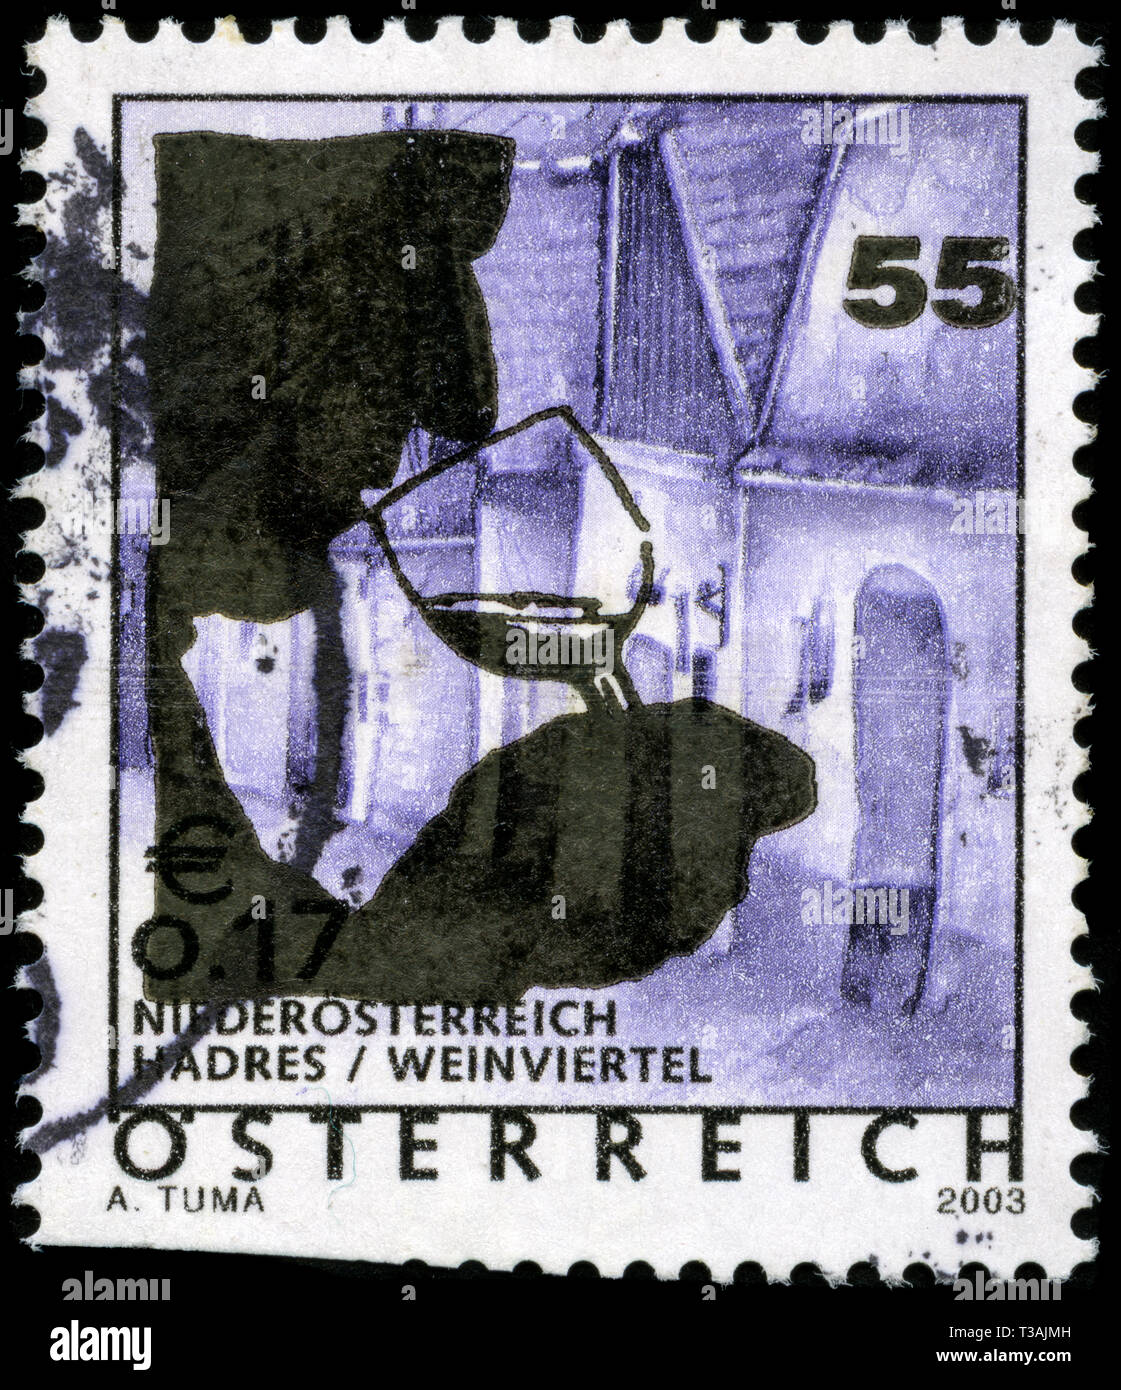 Postage stamp from Austria in the Holiday country Austria series issued in 2005 Stock Photo